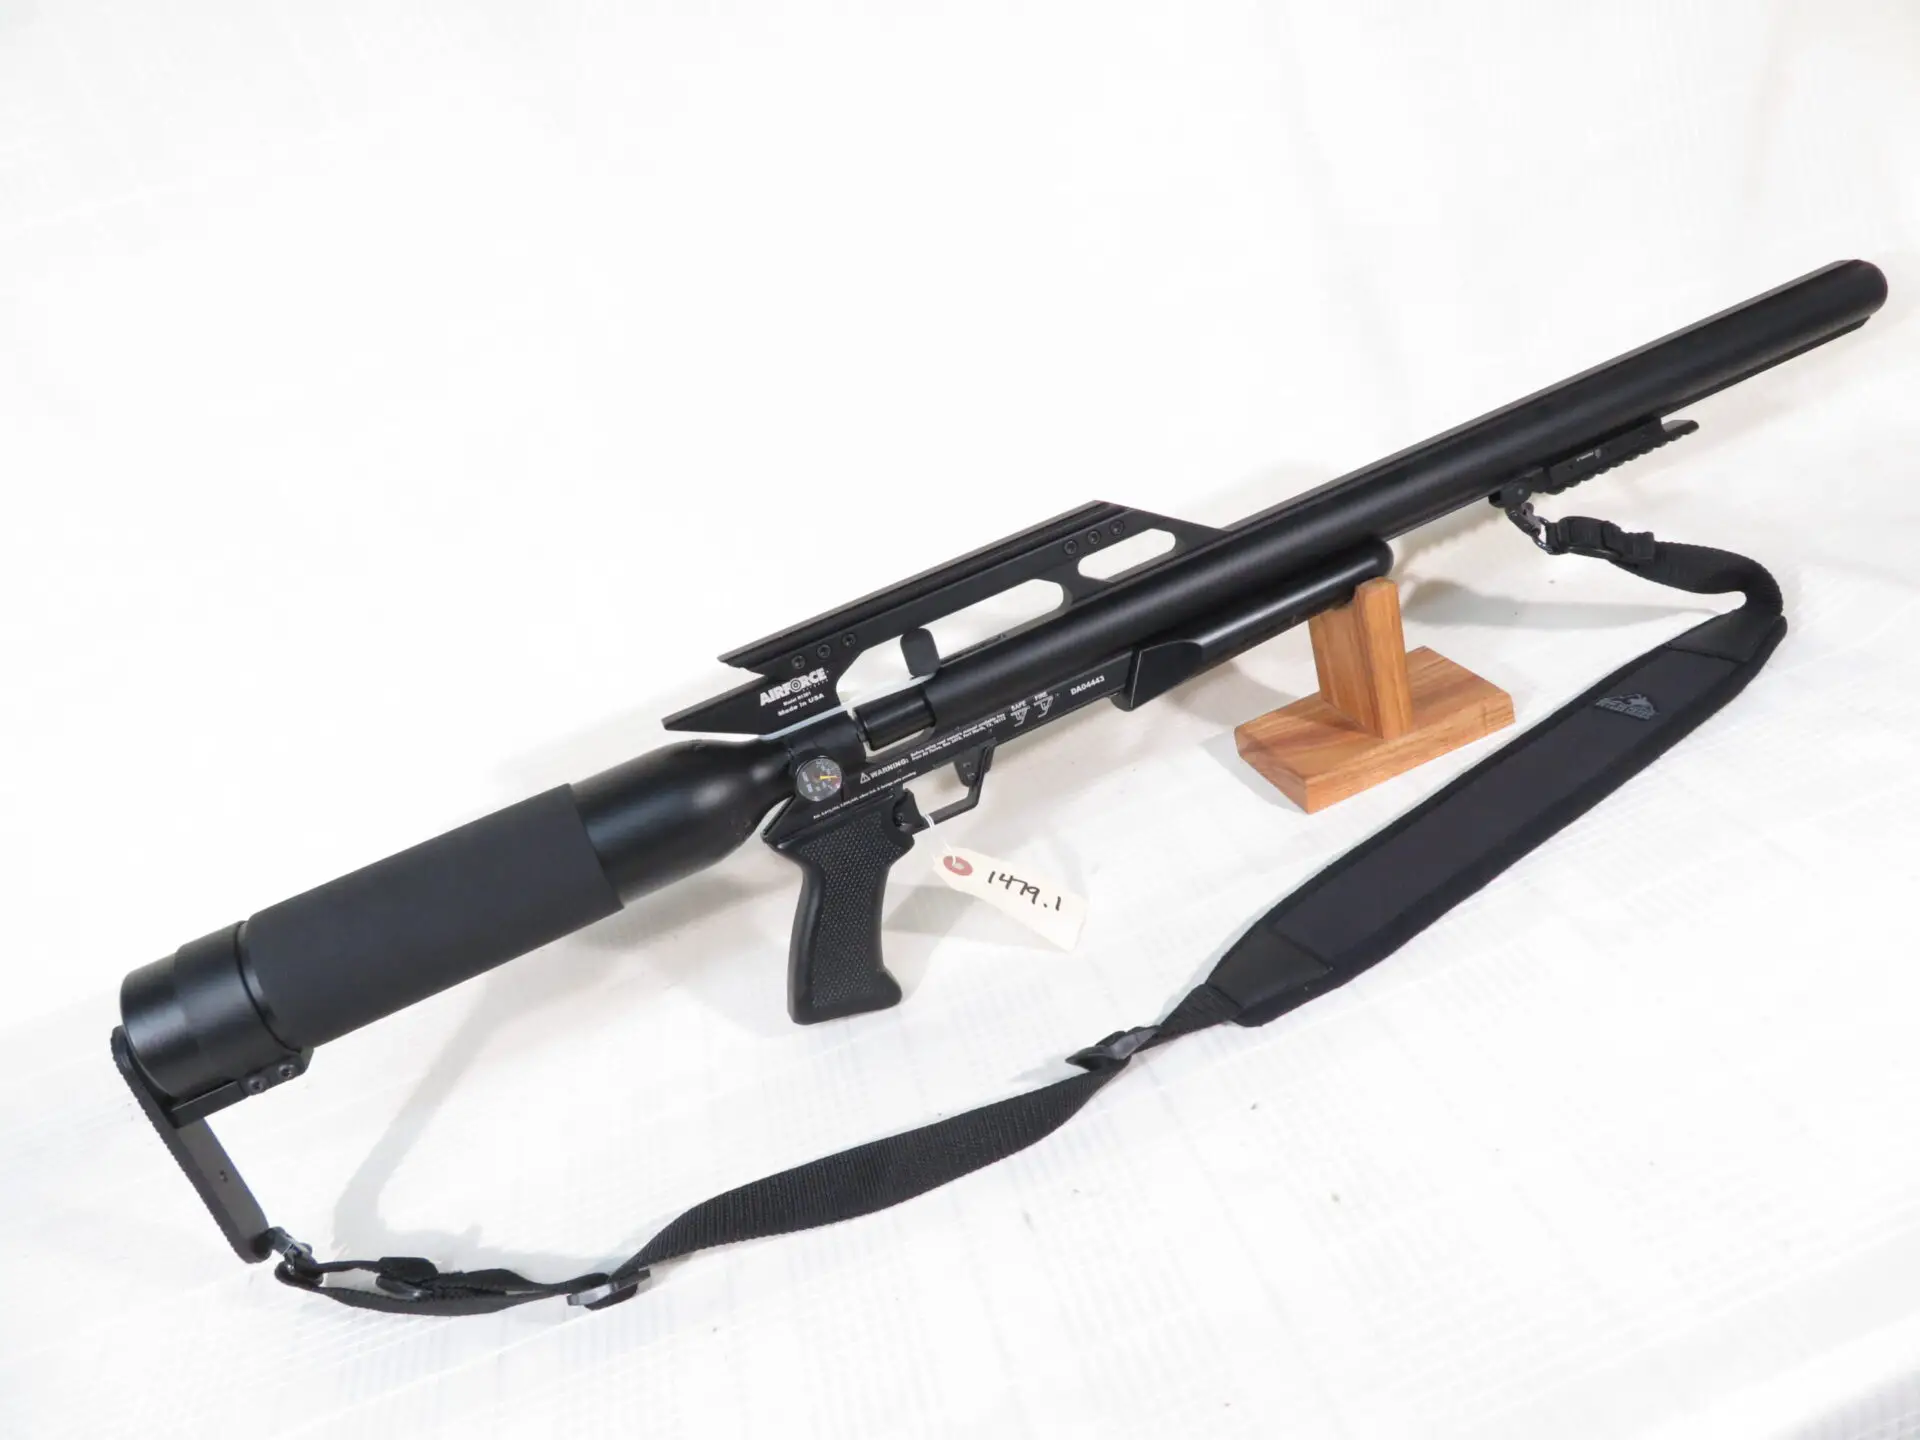 condorss2 Best PCP air rifles - 11 of the best PCP guns you can buy right now (Reviews and Buying Guide 2023)